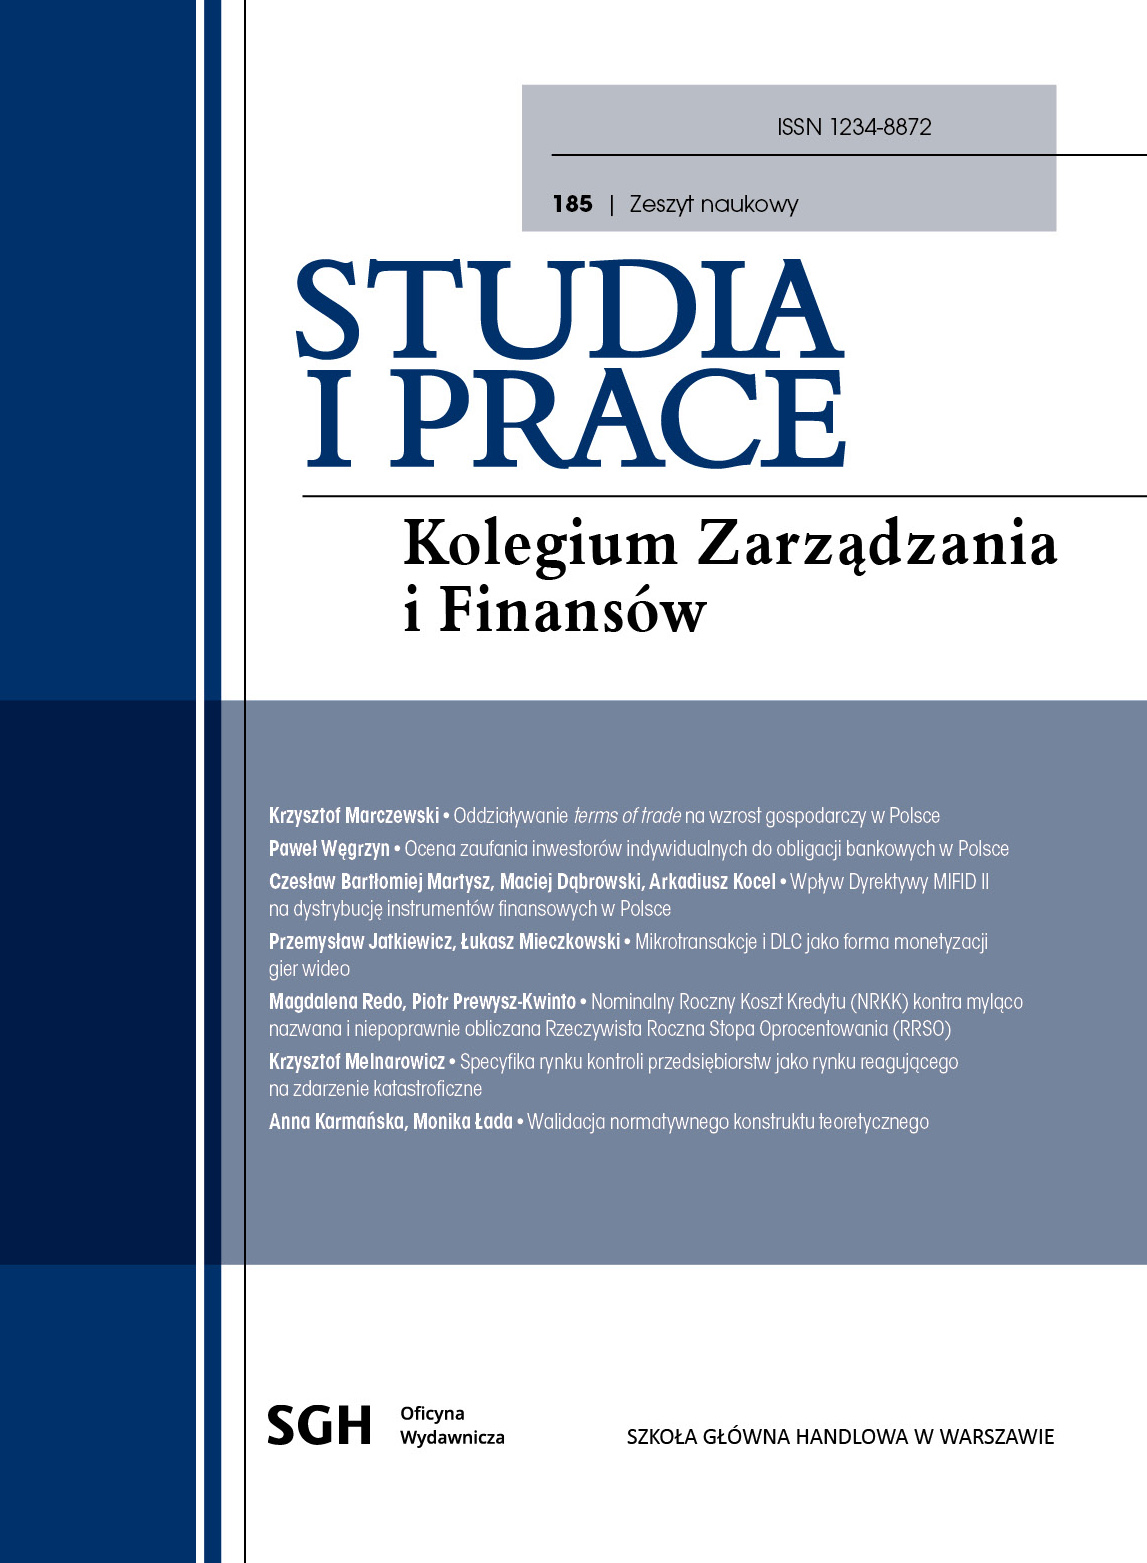 The level of individual investors’ confidence in bank bonds in Poland Cover Image